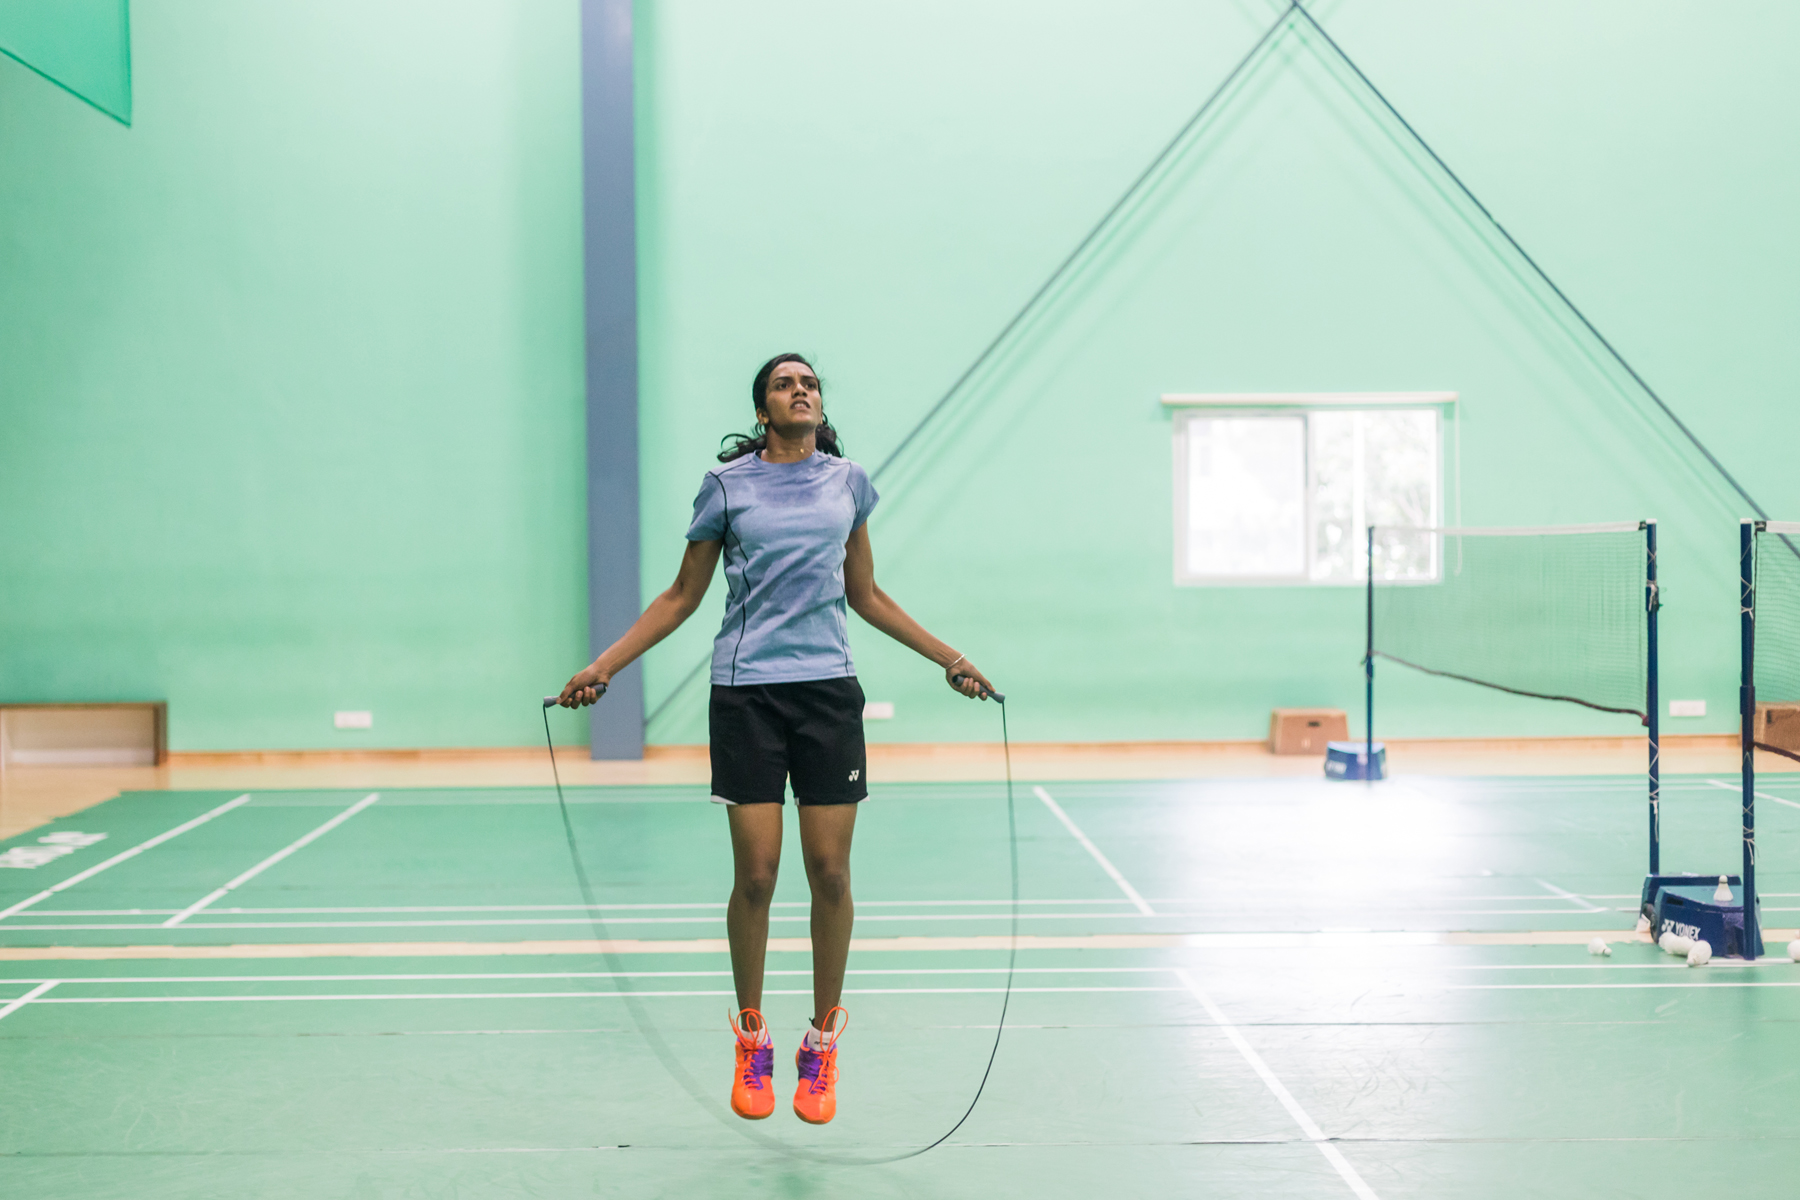 PV Sindhu within reach of the top